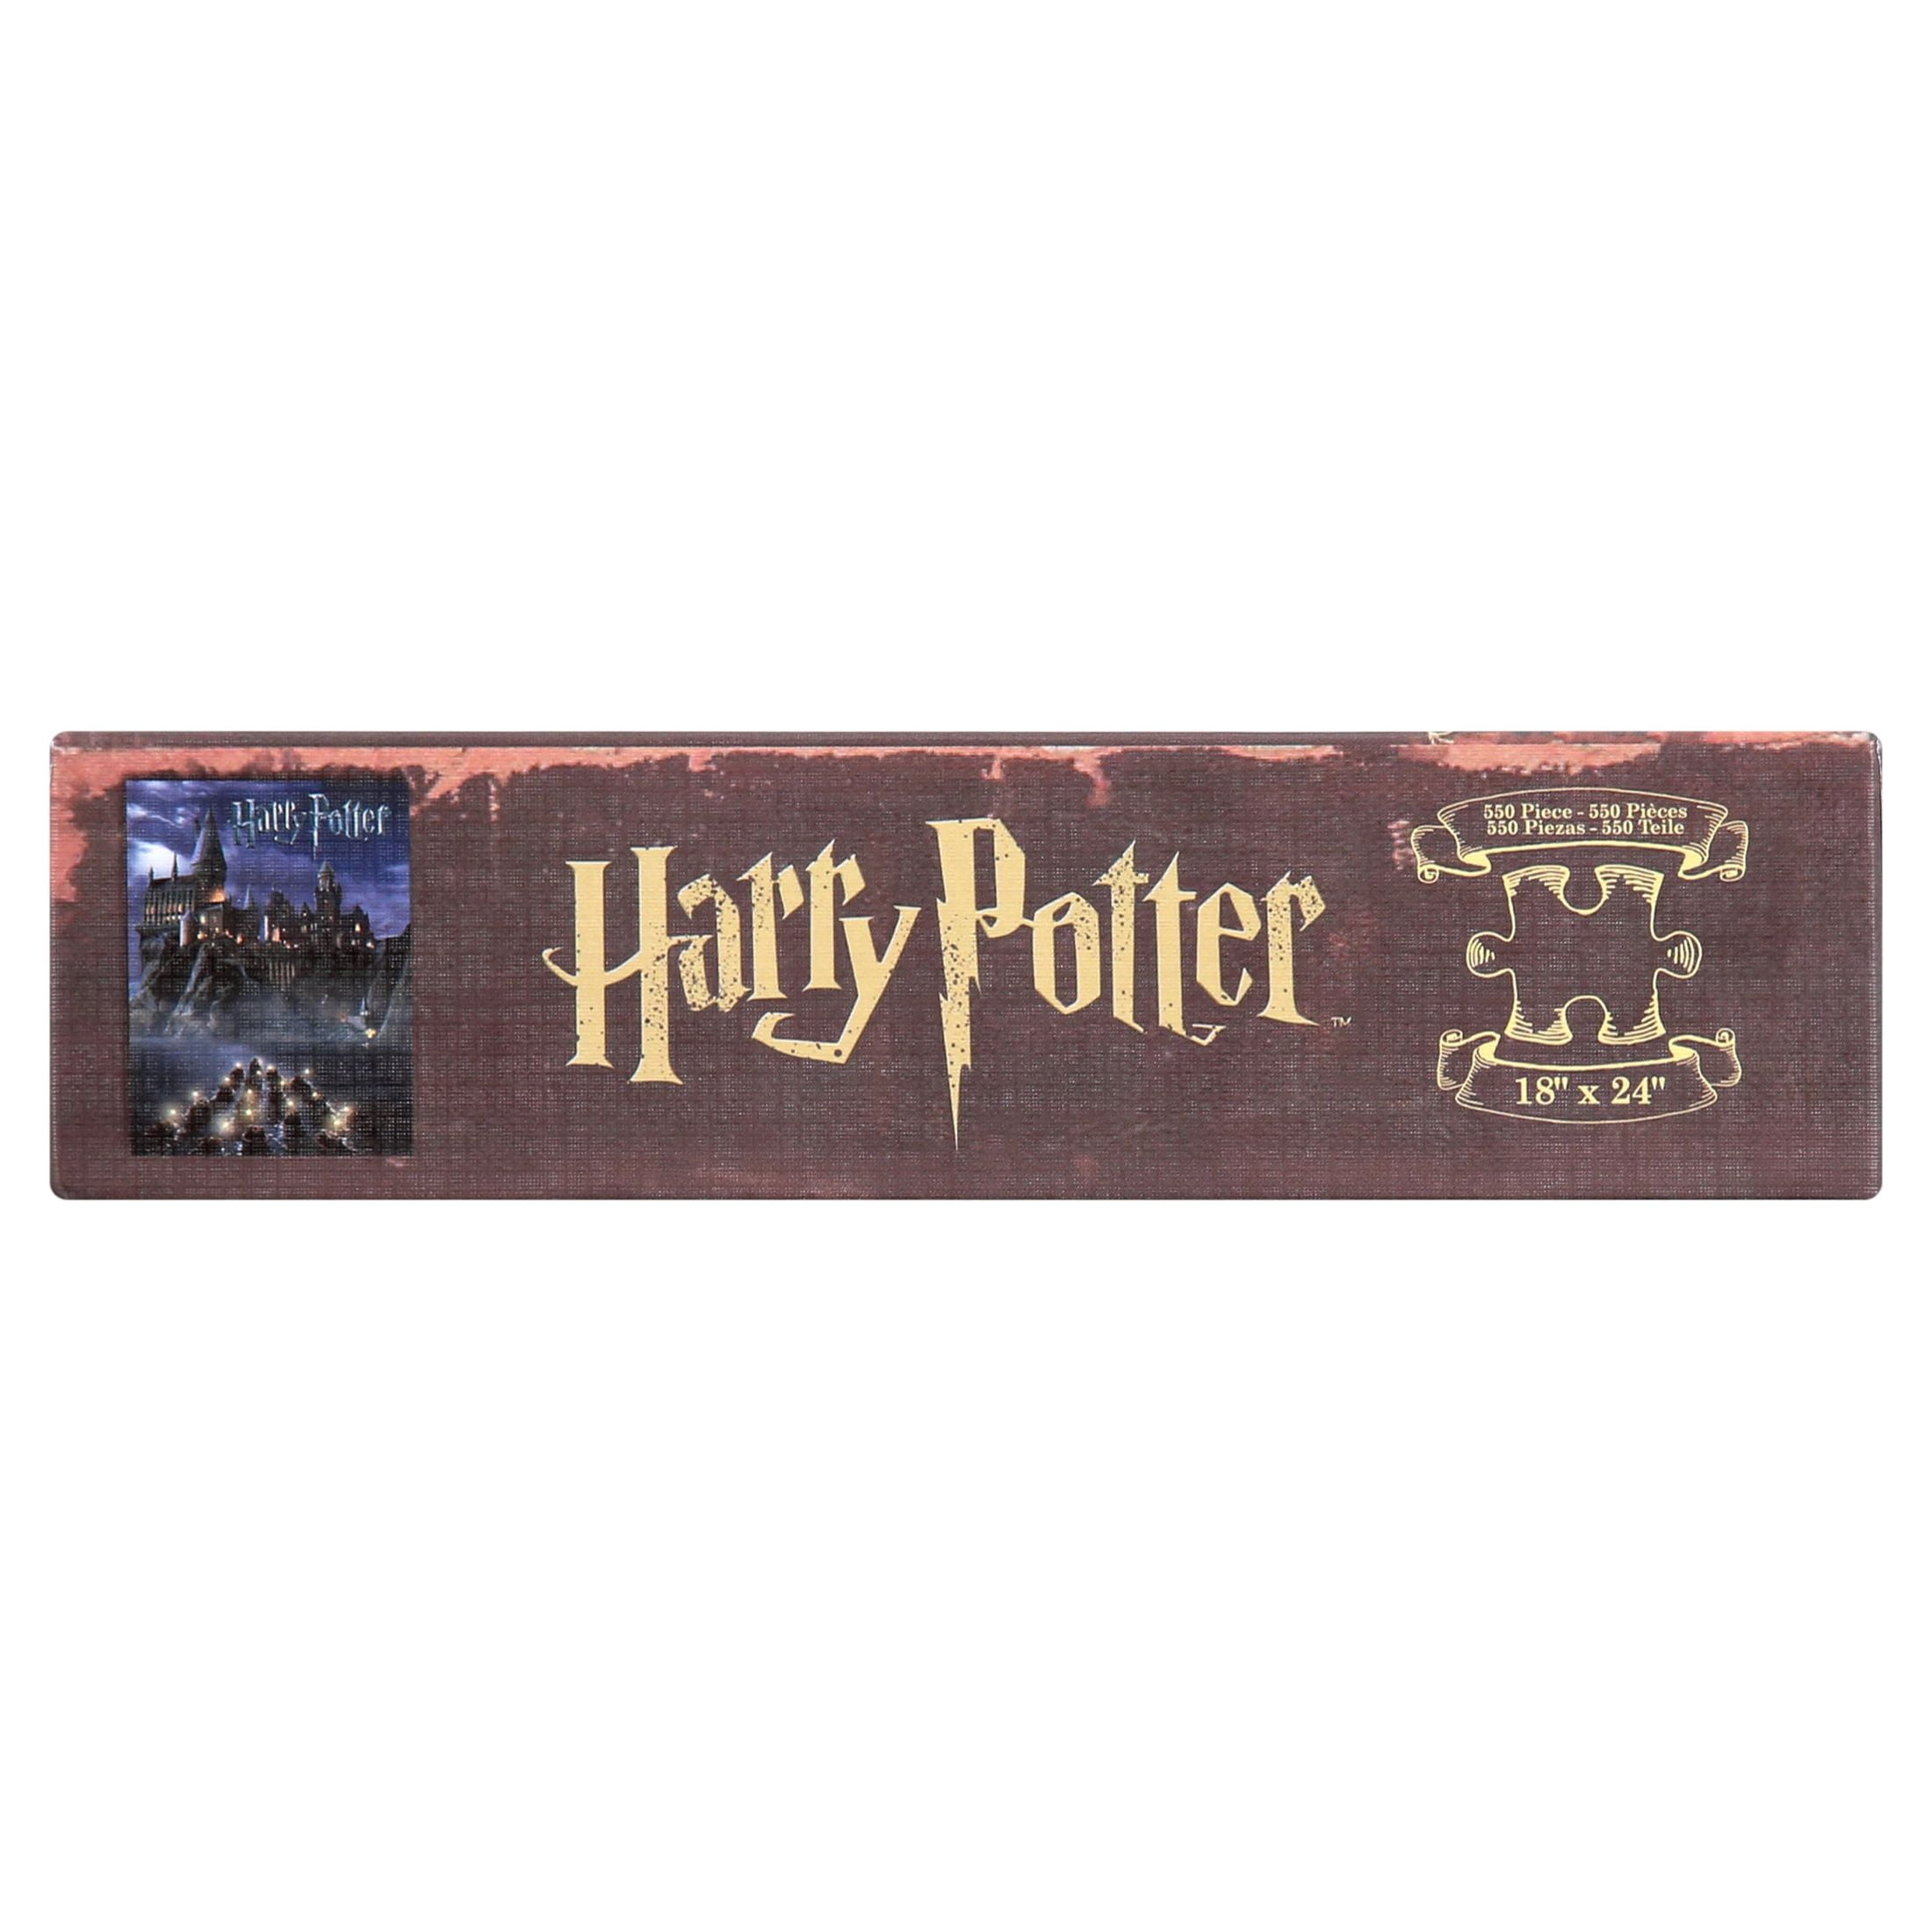  USAopoly World of Harry Potter 550Piece Jigsaw Puzzle, Art  from Harry Potter & The Sorcerer's Stone Movie, Official Harry Potter  Merchandise